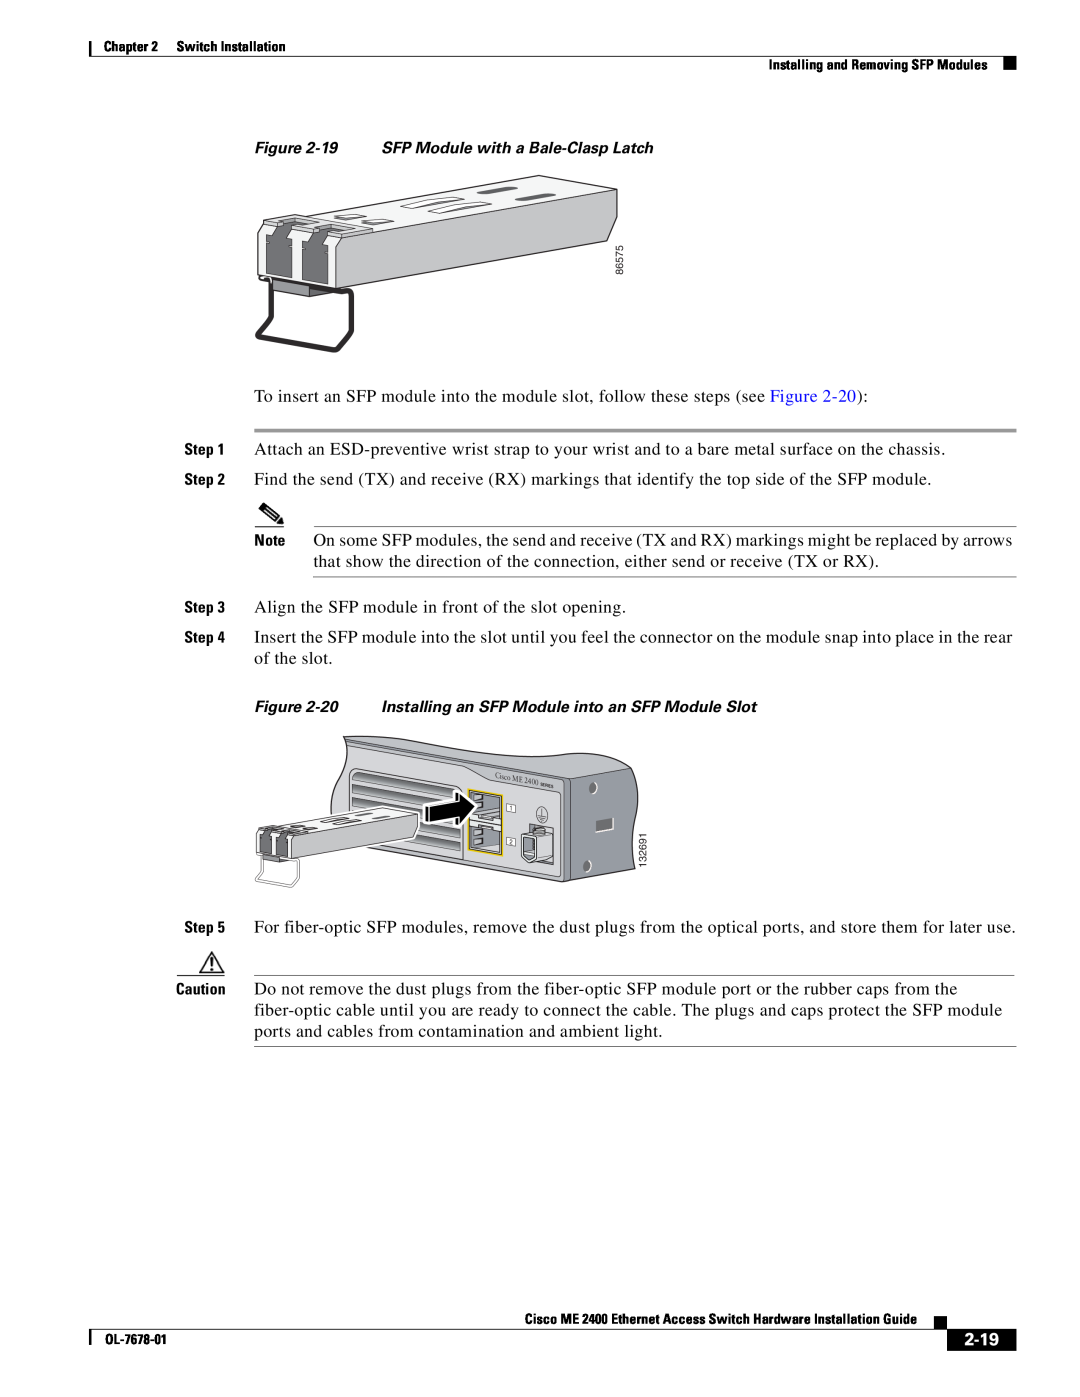 Cisco Systems ME 2400 manual 2-19, Align the SFP module in front of the slot opening 